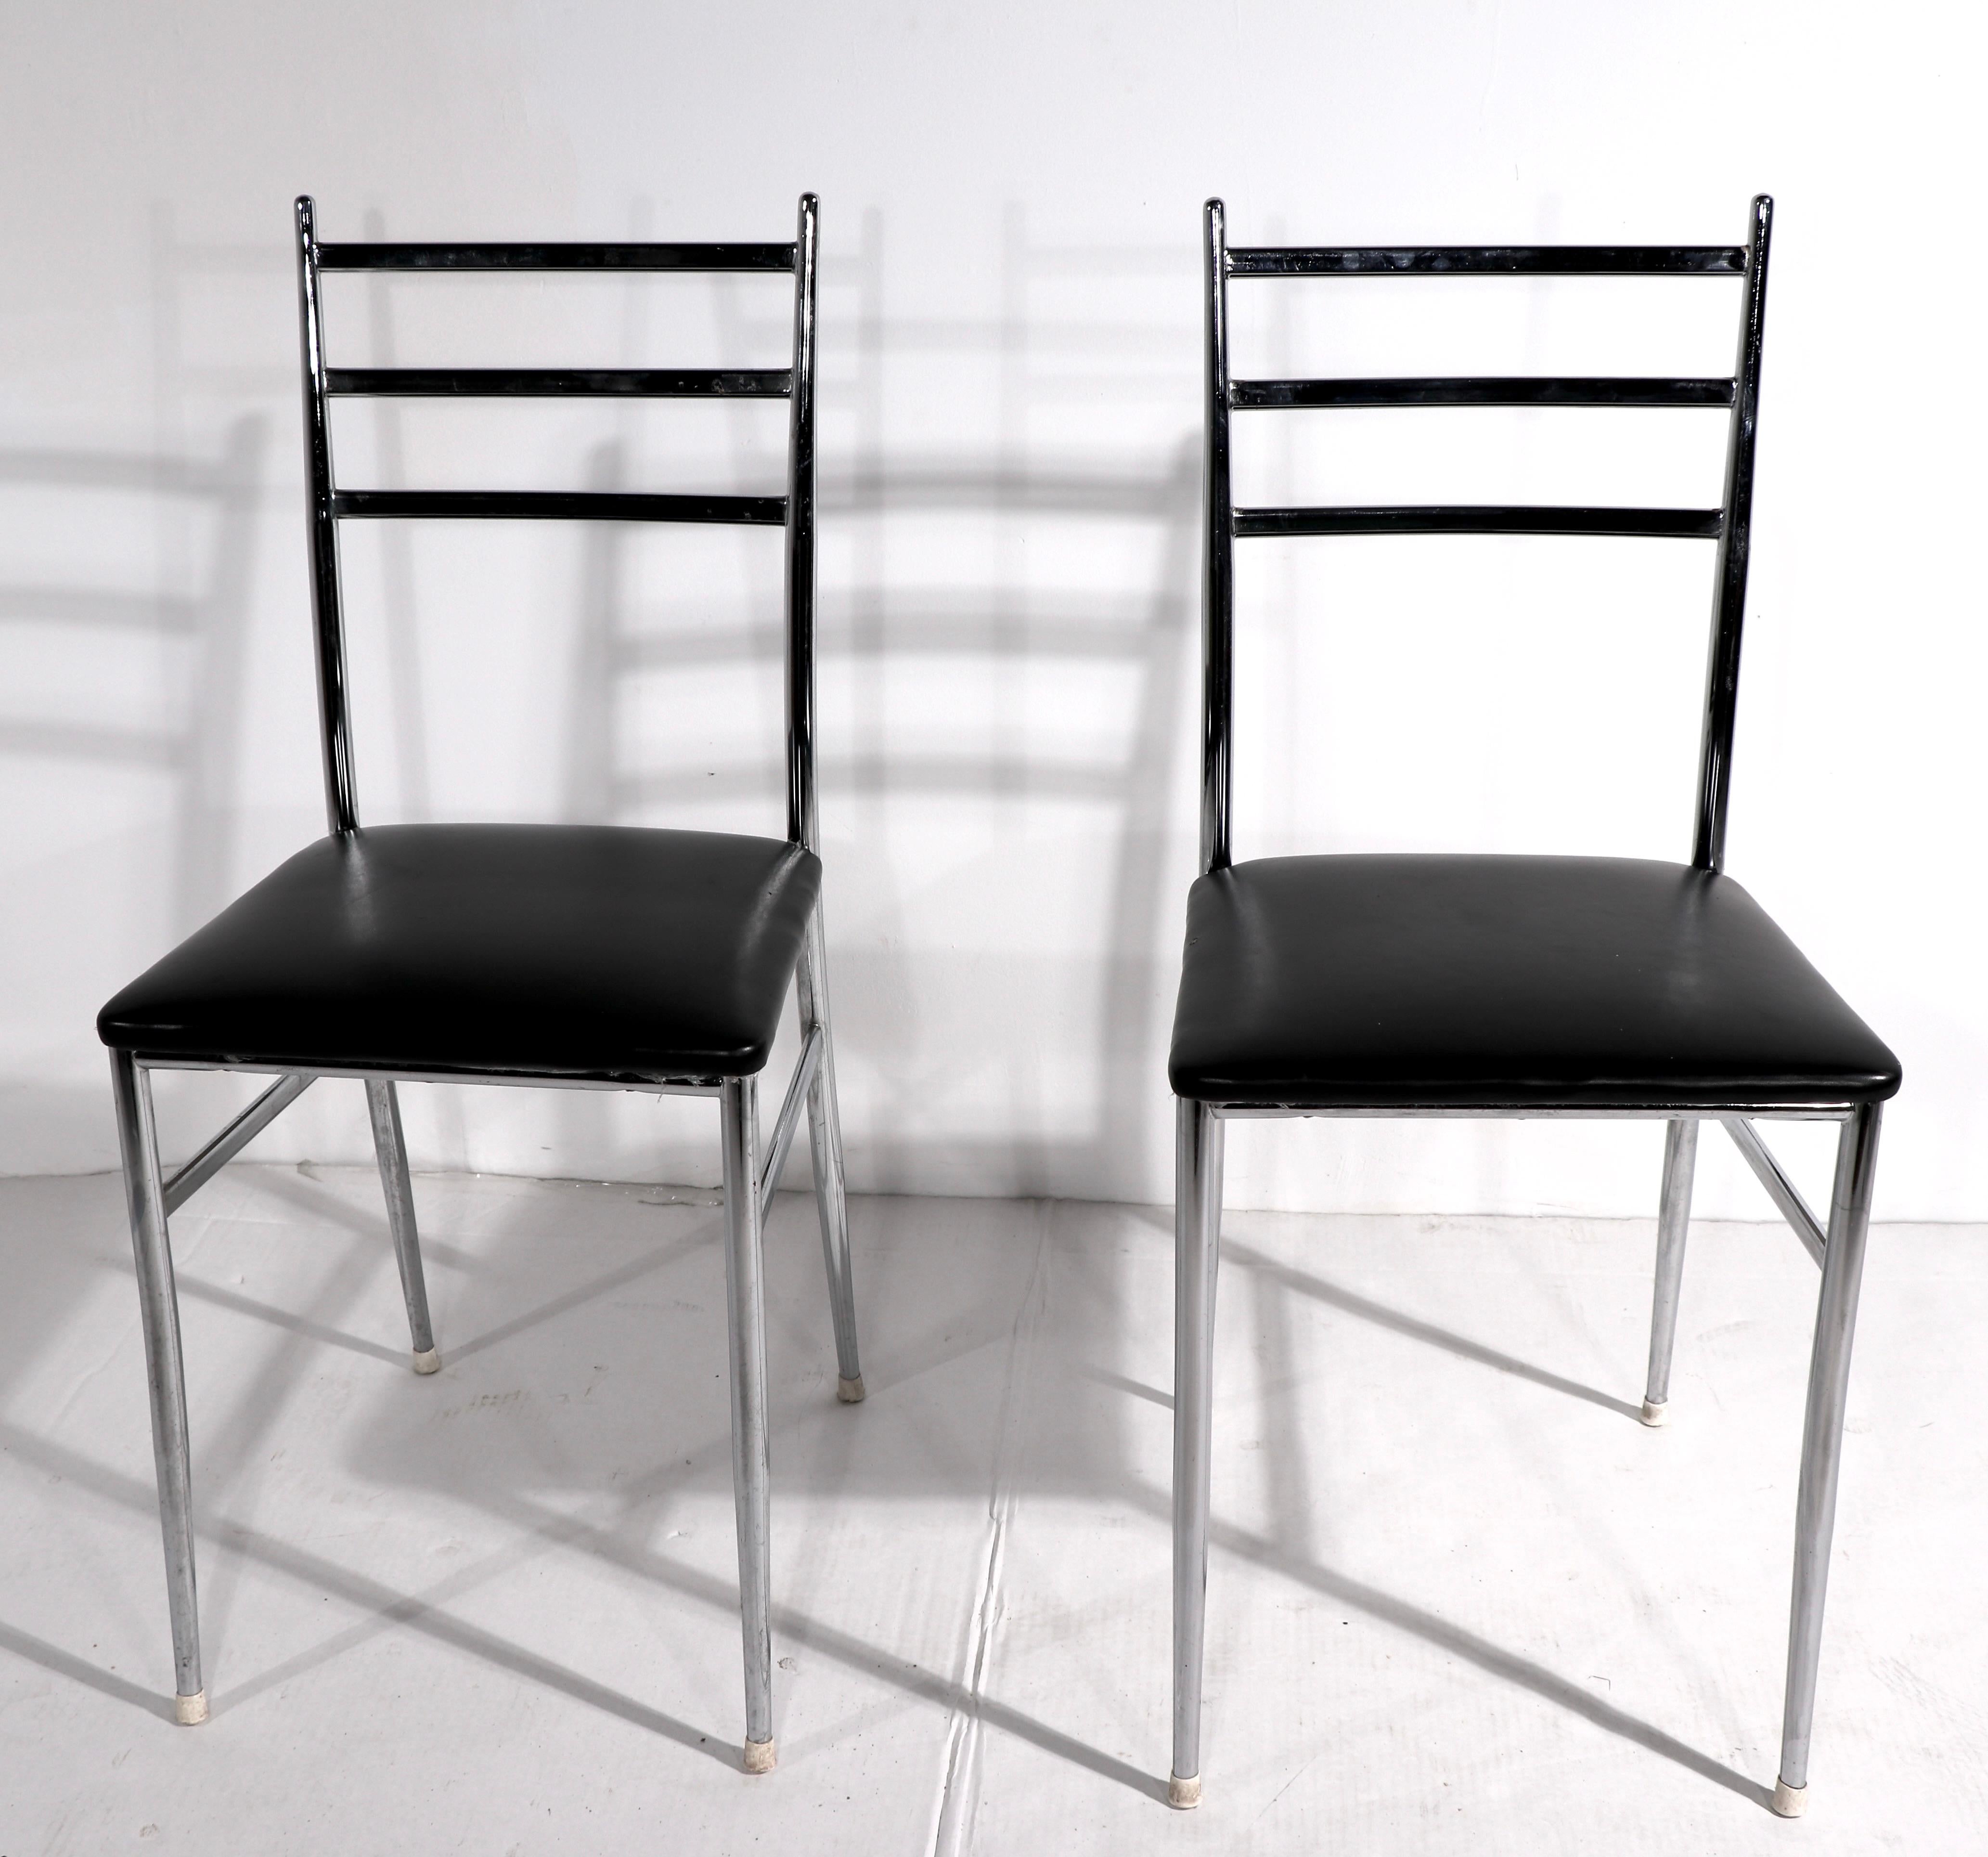 Stylish pair of chrome ladder back chairs, design reminiscent of the iconic Ponti Superleggera chair. The chairs are in very good original condition, the black seats have inconsequential flaws to the upholstery, normal and consistent with age.